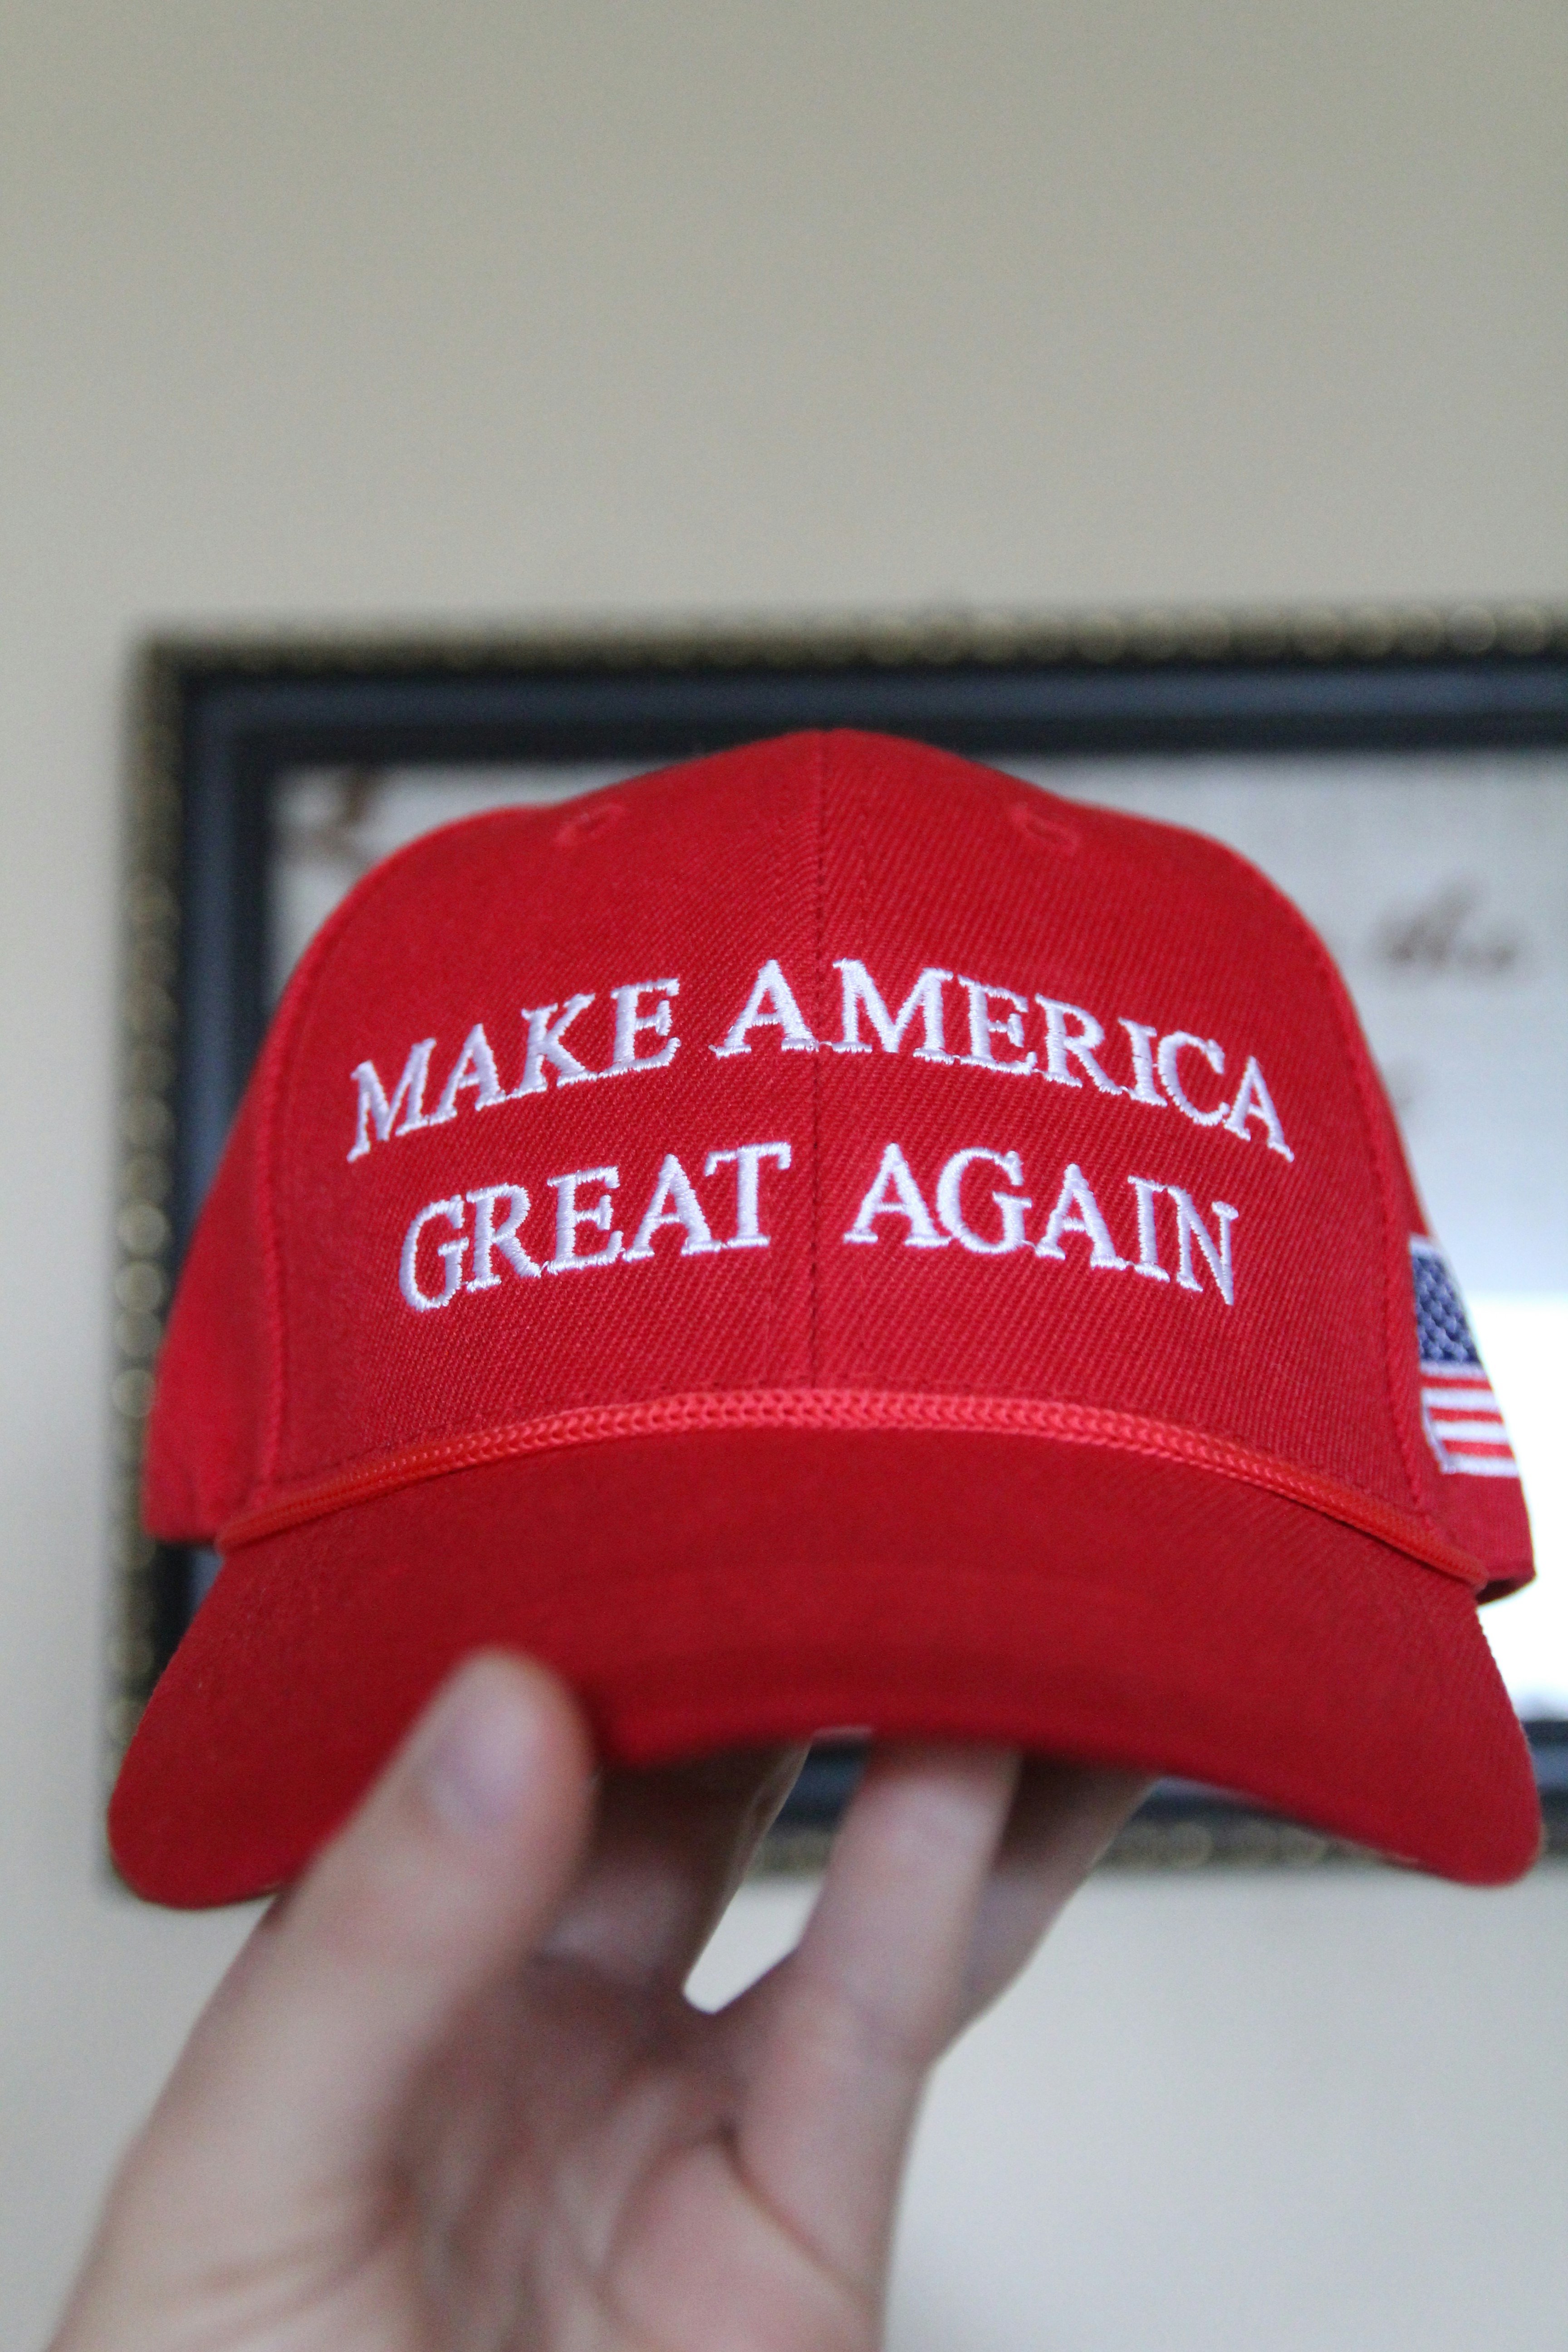 If you use this pic, please tag me @Aubrey_Hx ☺️ 
Our wonderful president’s hat. He truly has done his job, and done it well! Promises made, promises kept.
VOTE TRUMP!!
4 more years! Pray pray!🙏🙏
God bless! 
TRUMP 2020  #MAGA🇺🇸
Our president truly deserves at least 4 more years!🧡